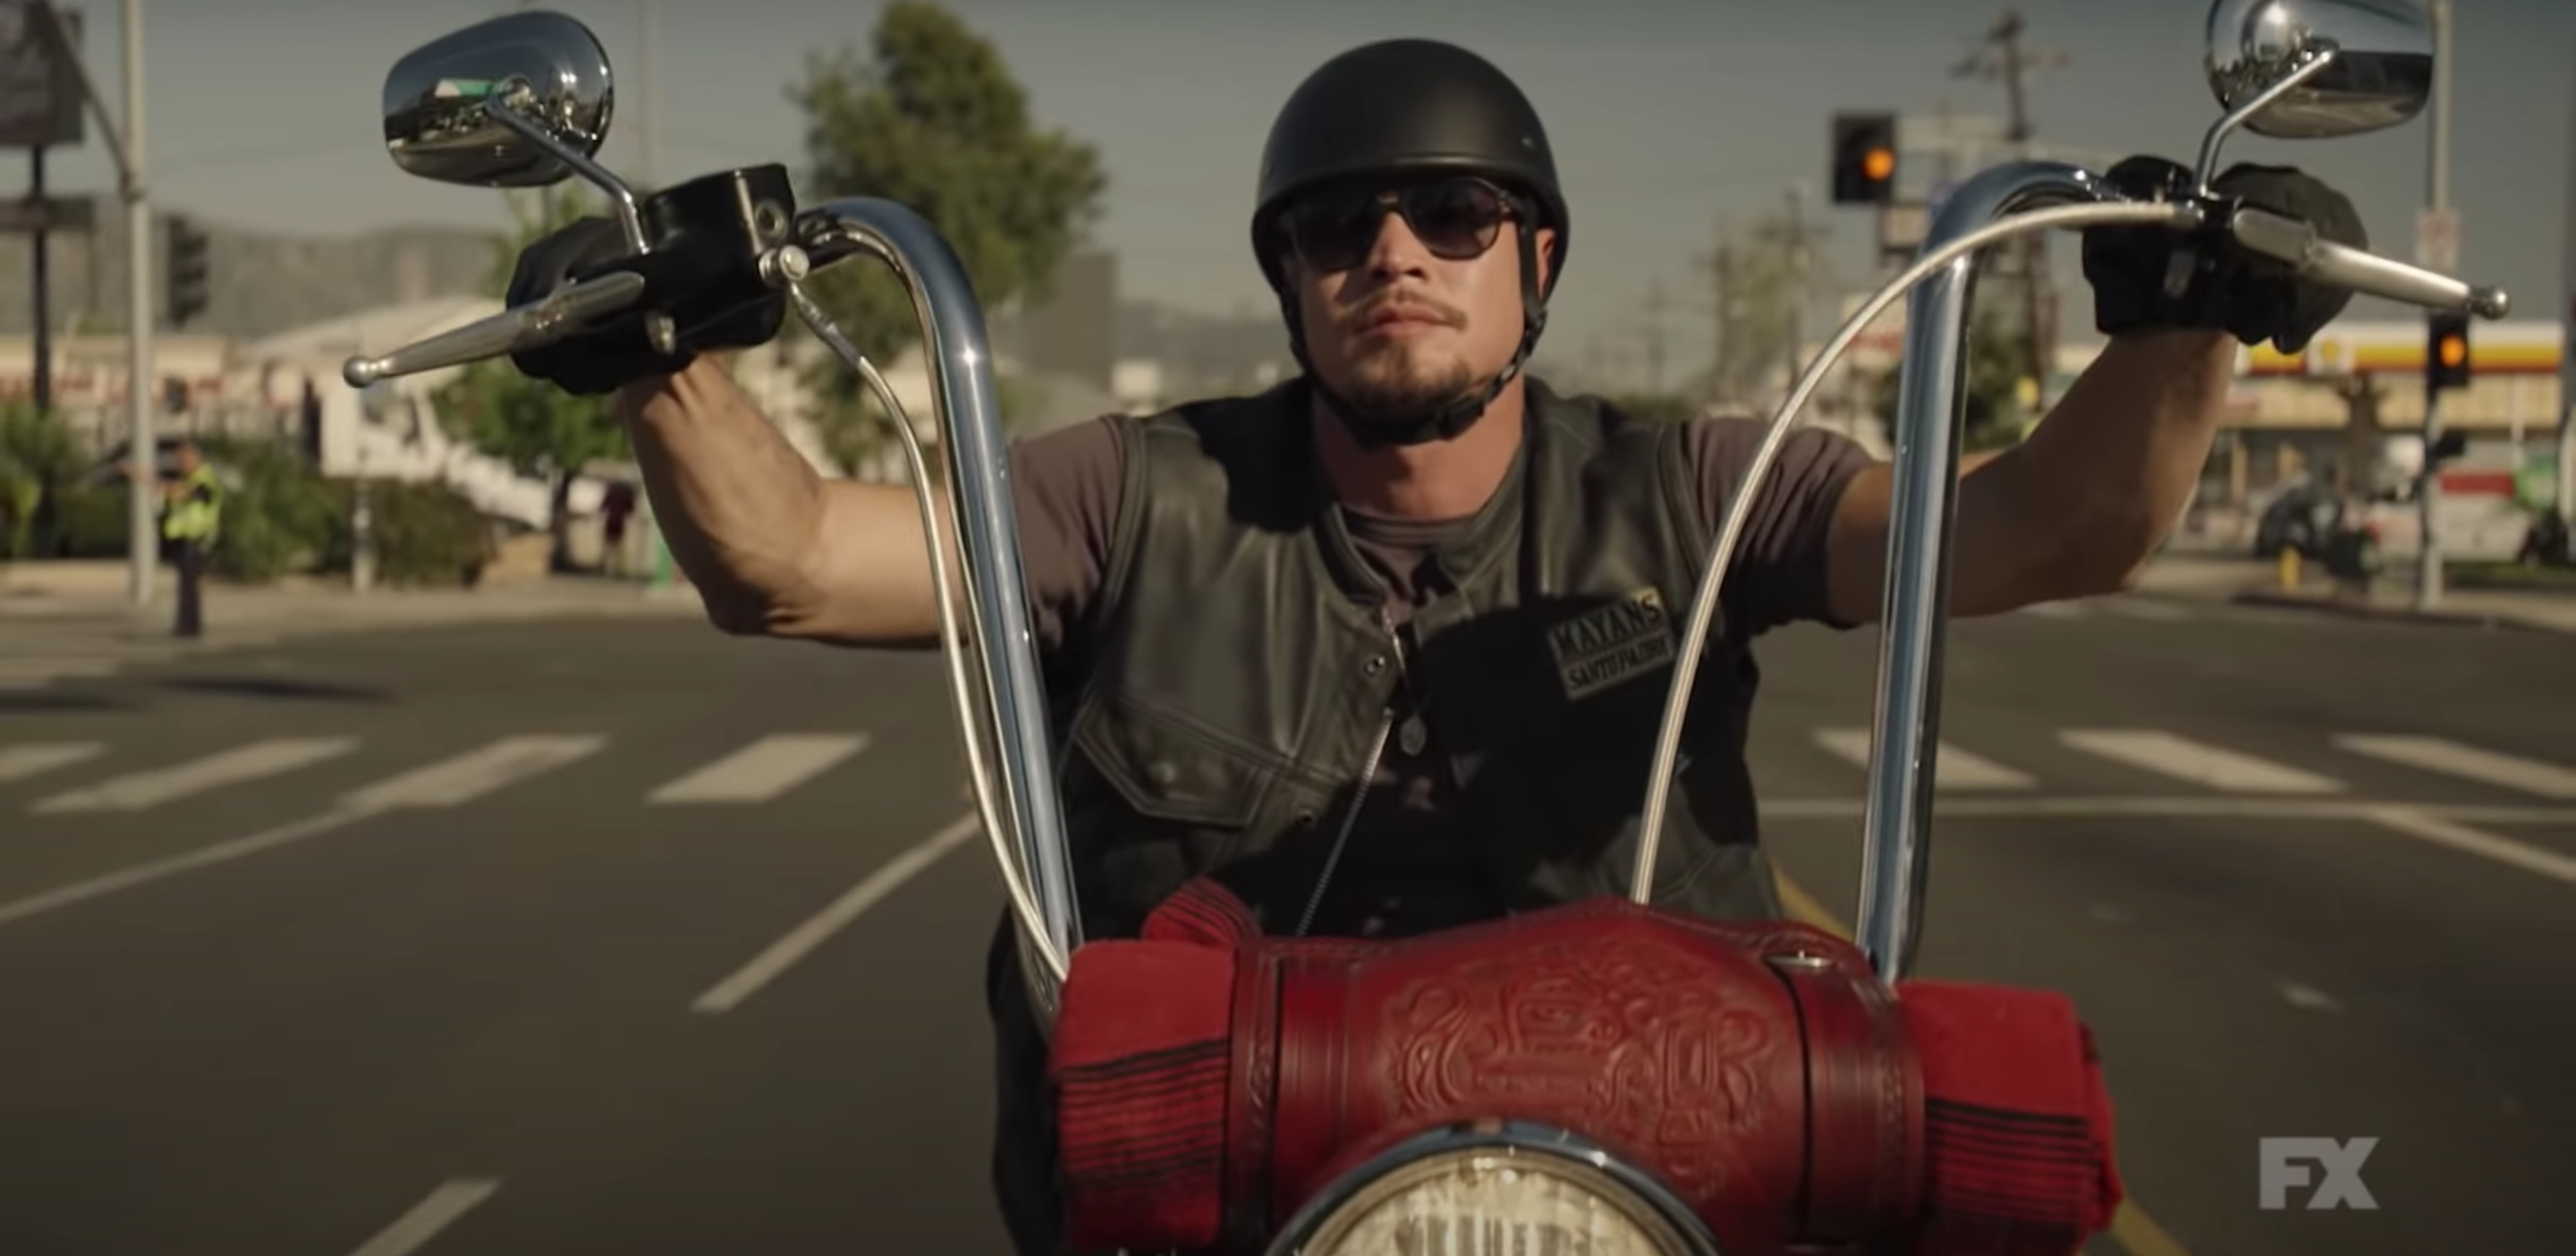 What Time Will 'Mayans MC' Premiere on FX and Hulu?